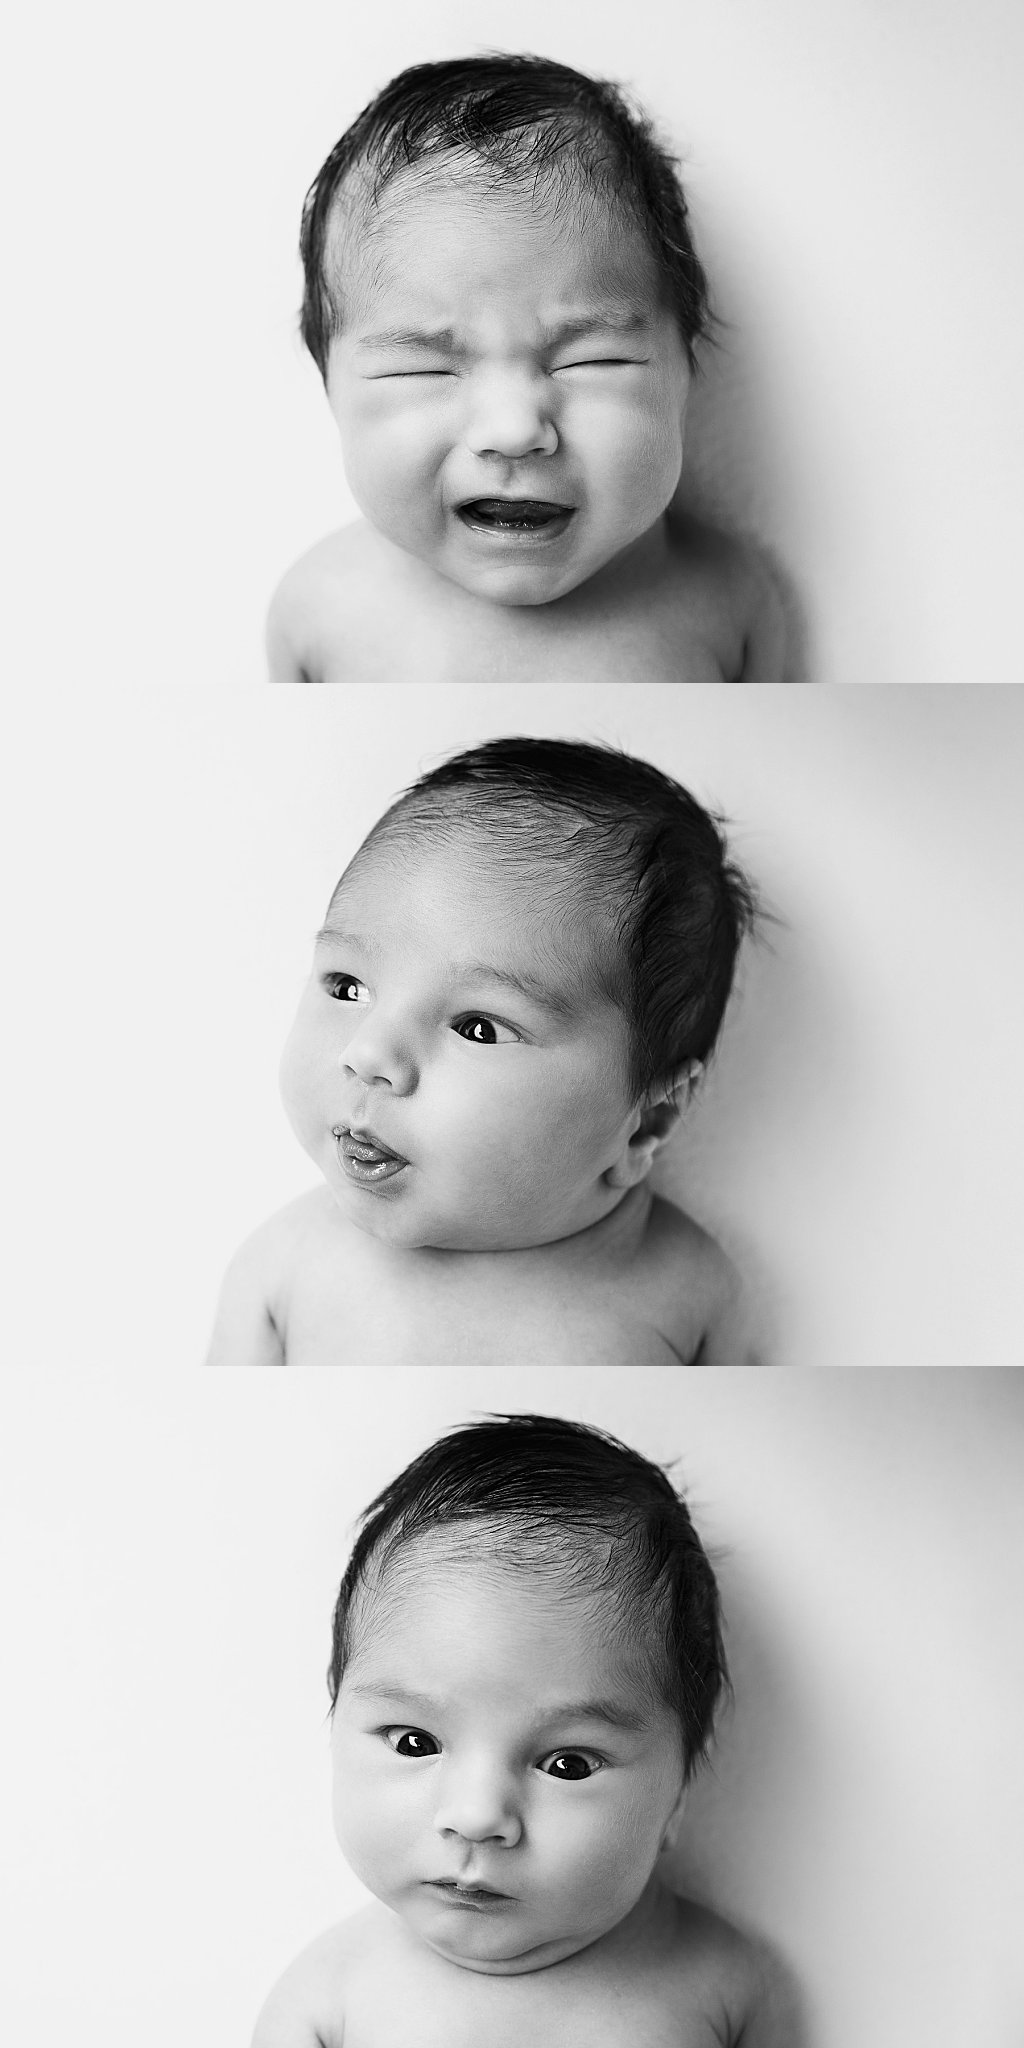 baby makes many expressions against white backdrop by Amy Yang Photography